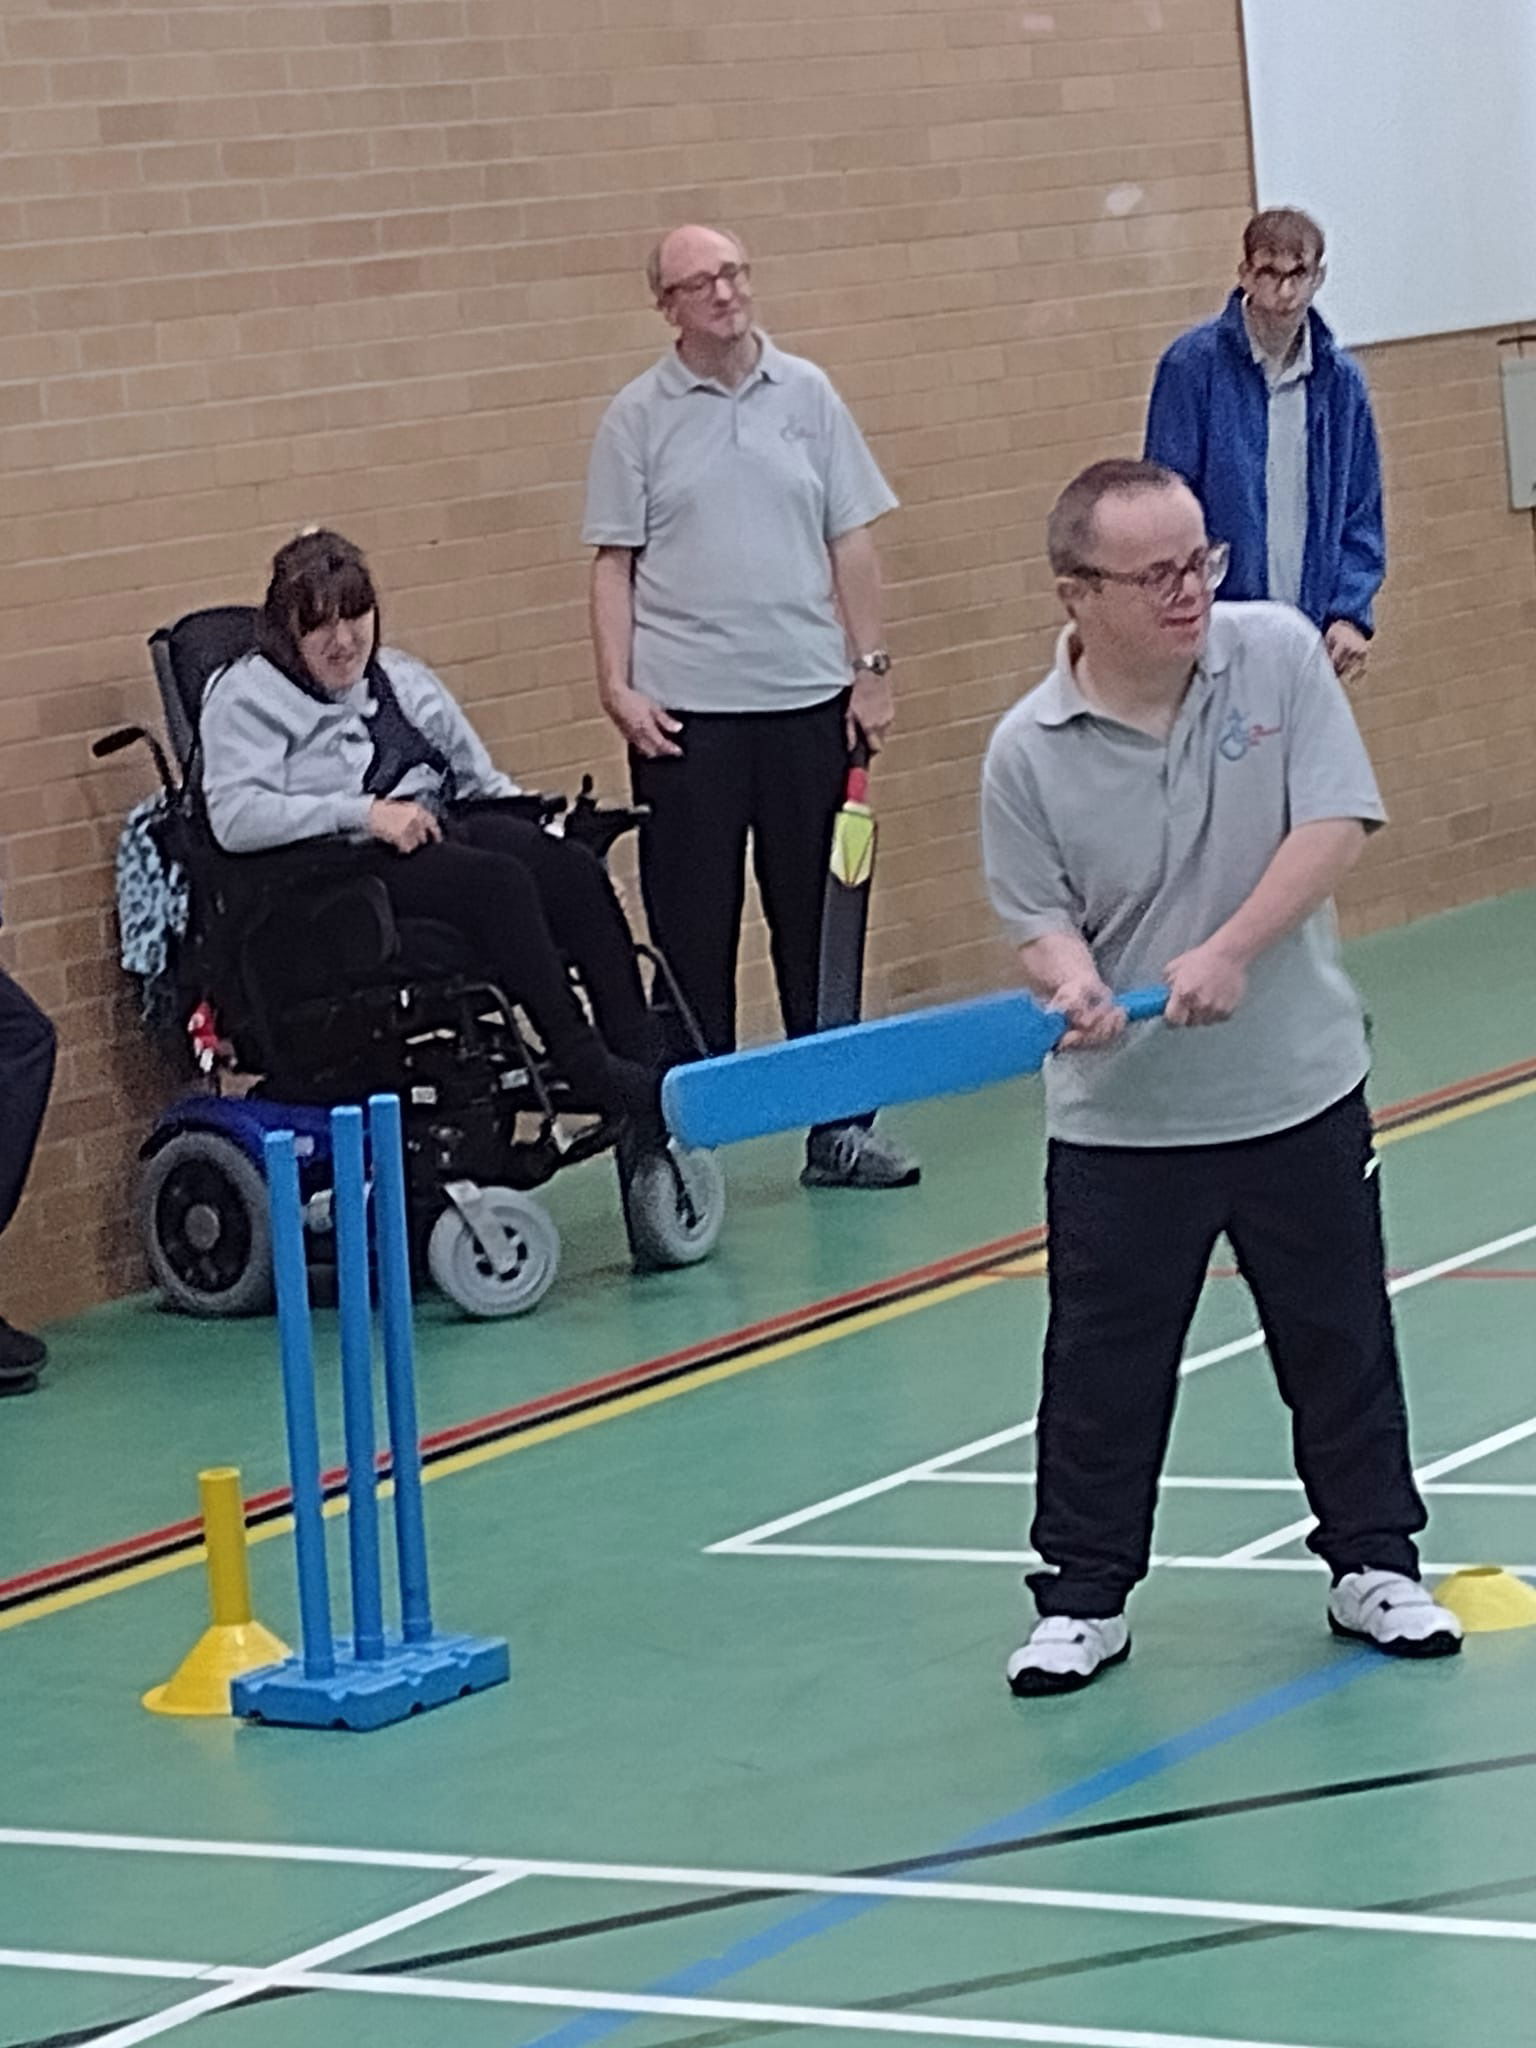 We are now a Disability Cricket Champion Club